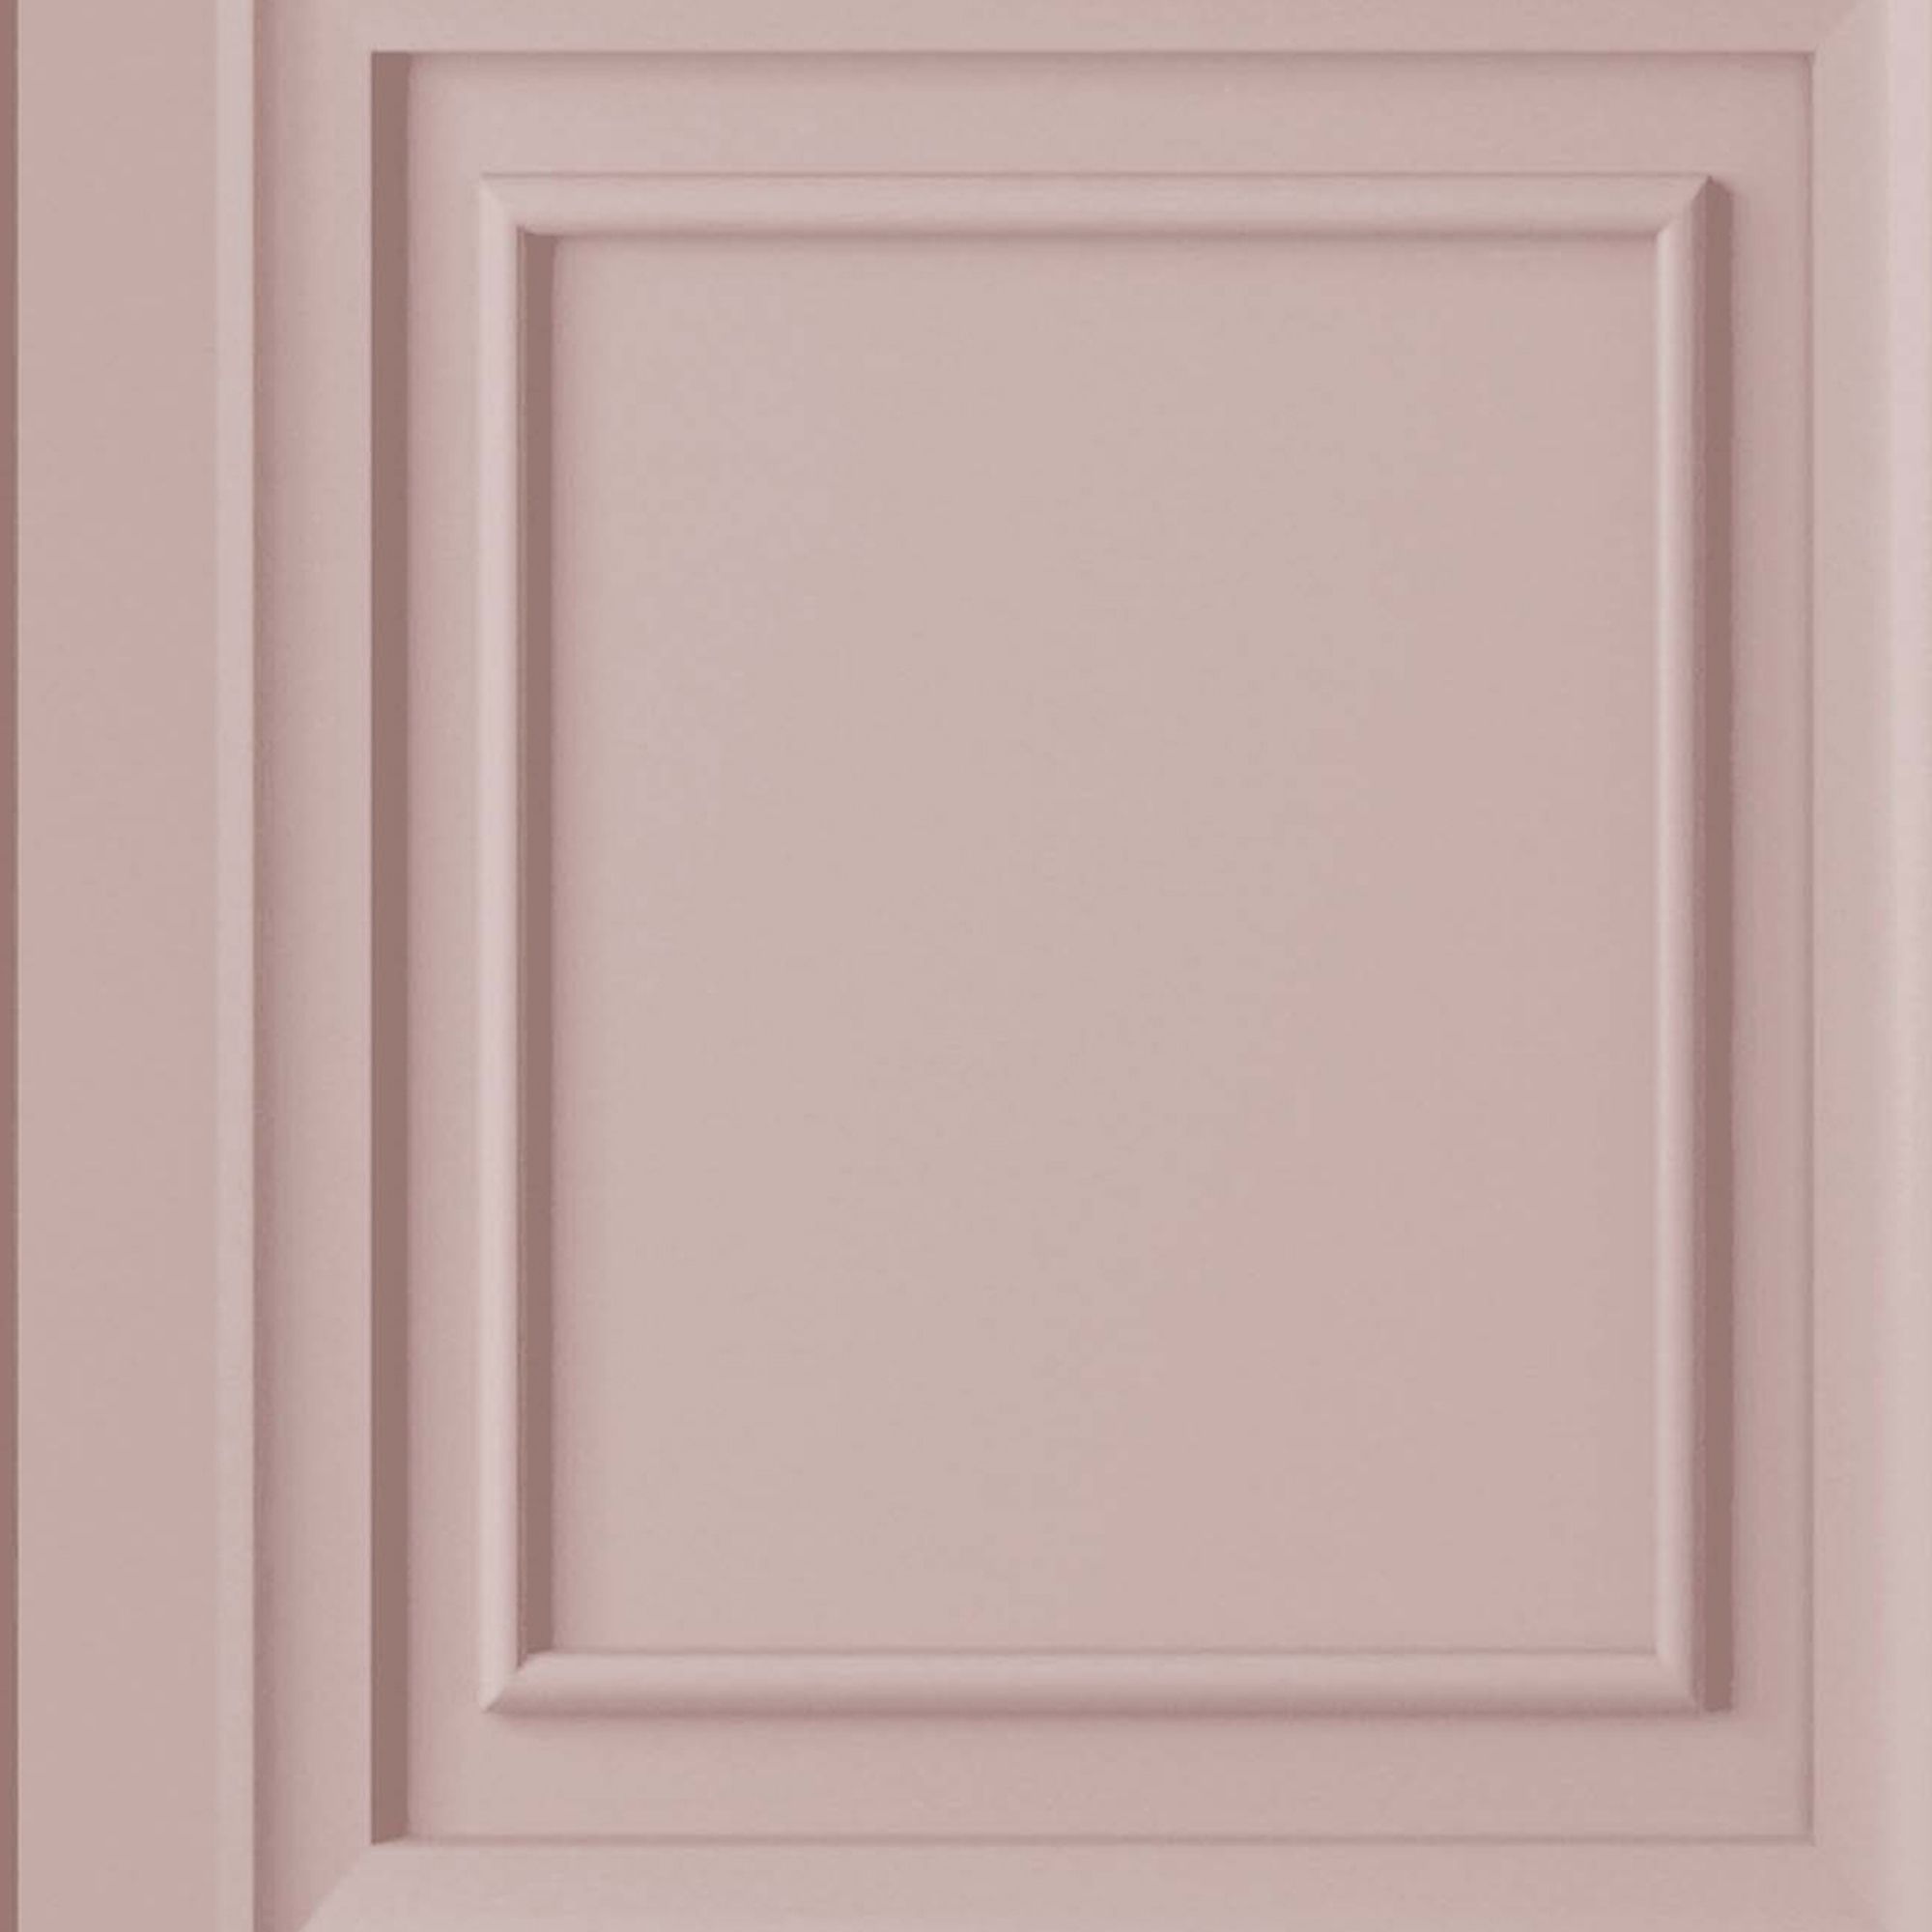 Laura Ashley Country charm Pink Wood panel Smooth Wallpaper Sample